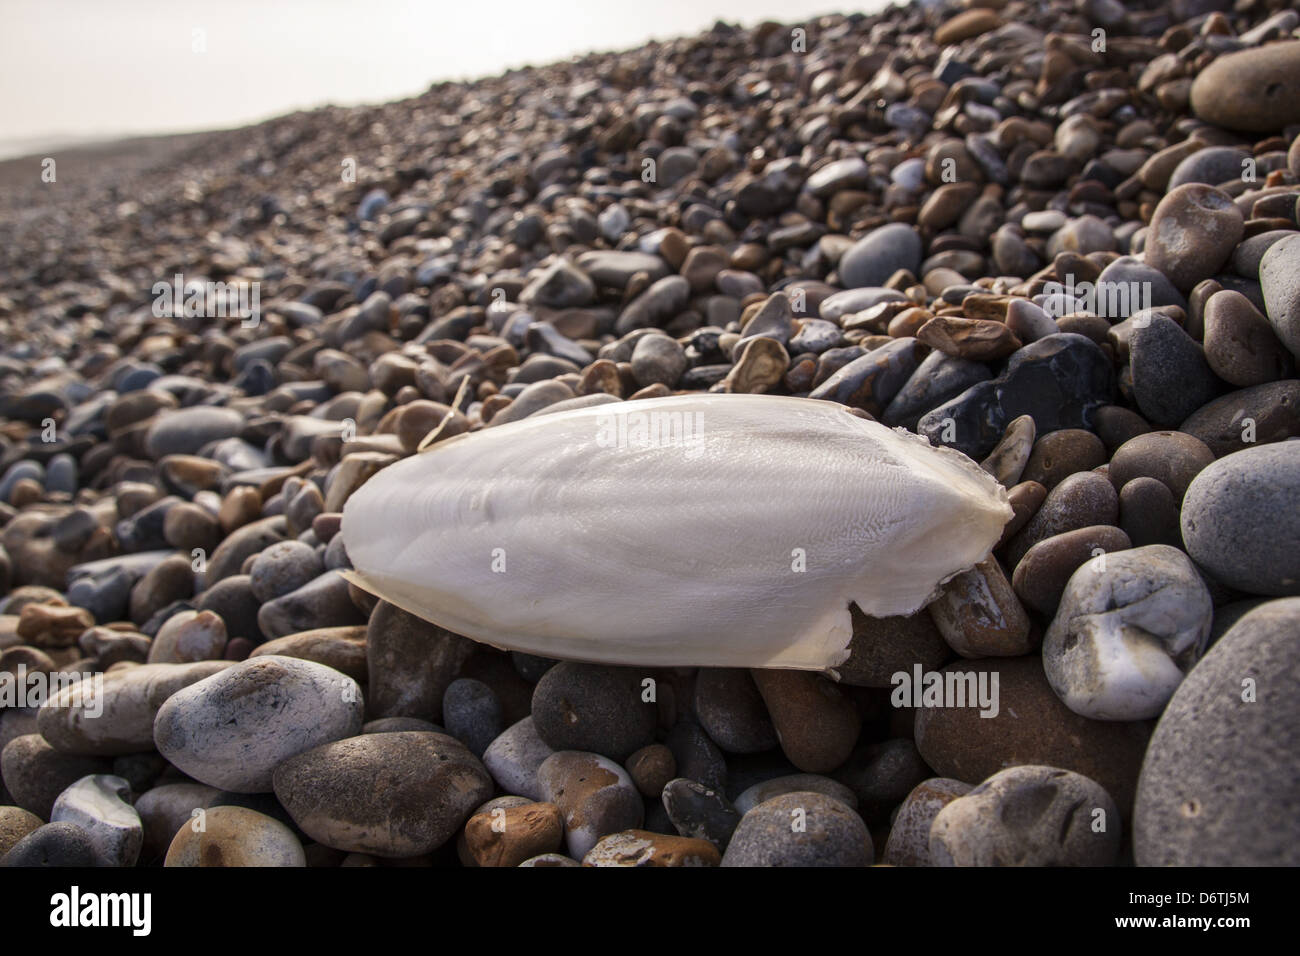 Common Cuttlefish (Sepia officinalis) cuttlebone, washed up on a pebble beach, Aldeburgh, Suffolk, England, March Stock Photo